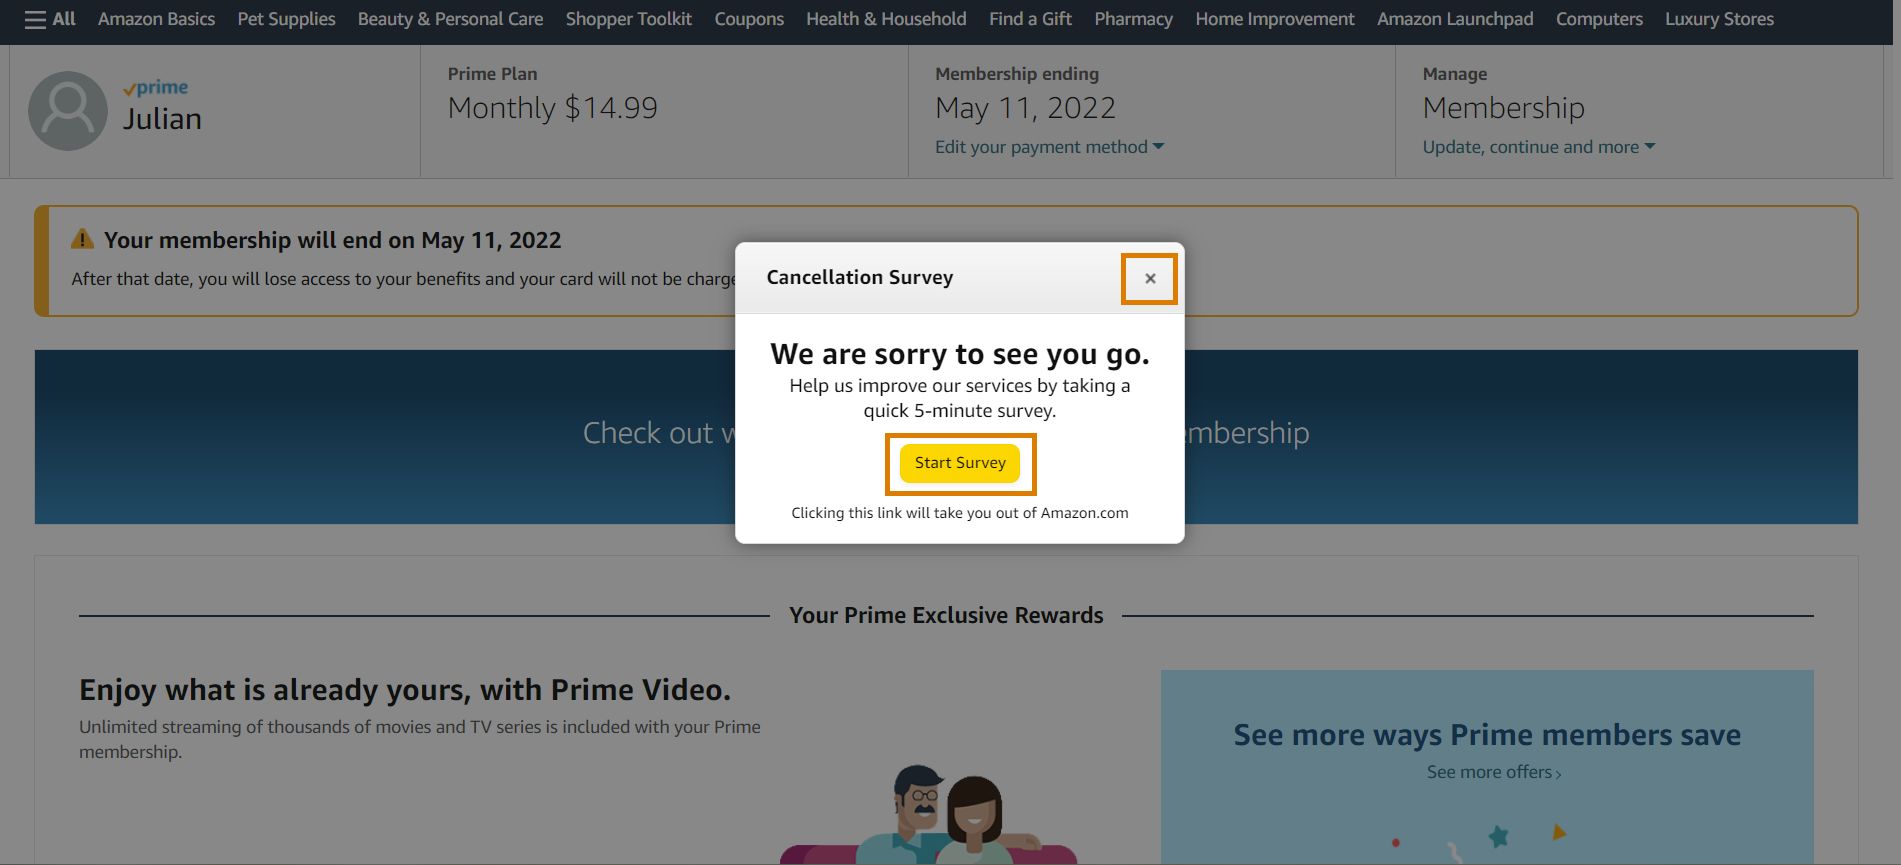 amazon prime central page with a pop-up requesting that the user start a survey. the start survey and close buttons are highlighted